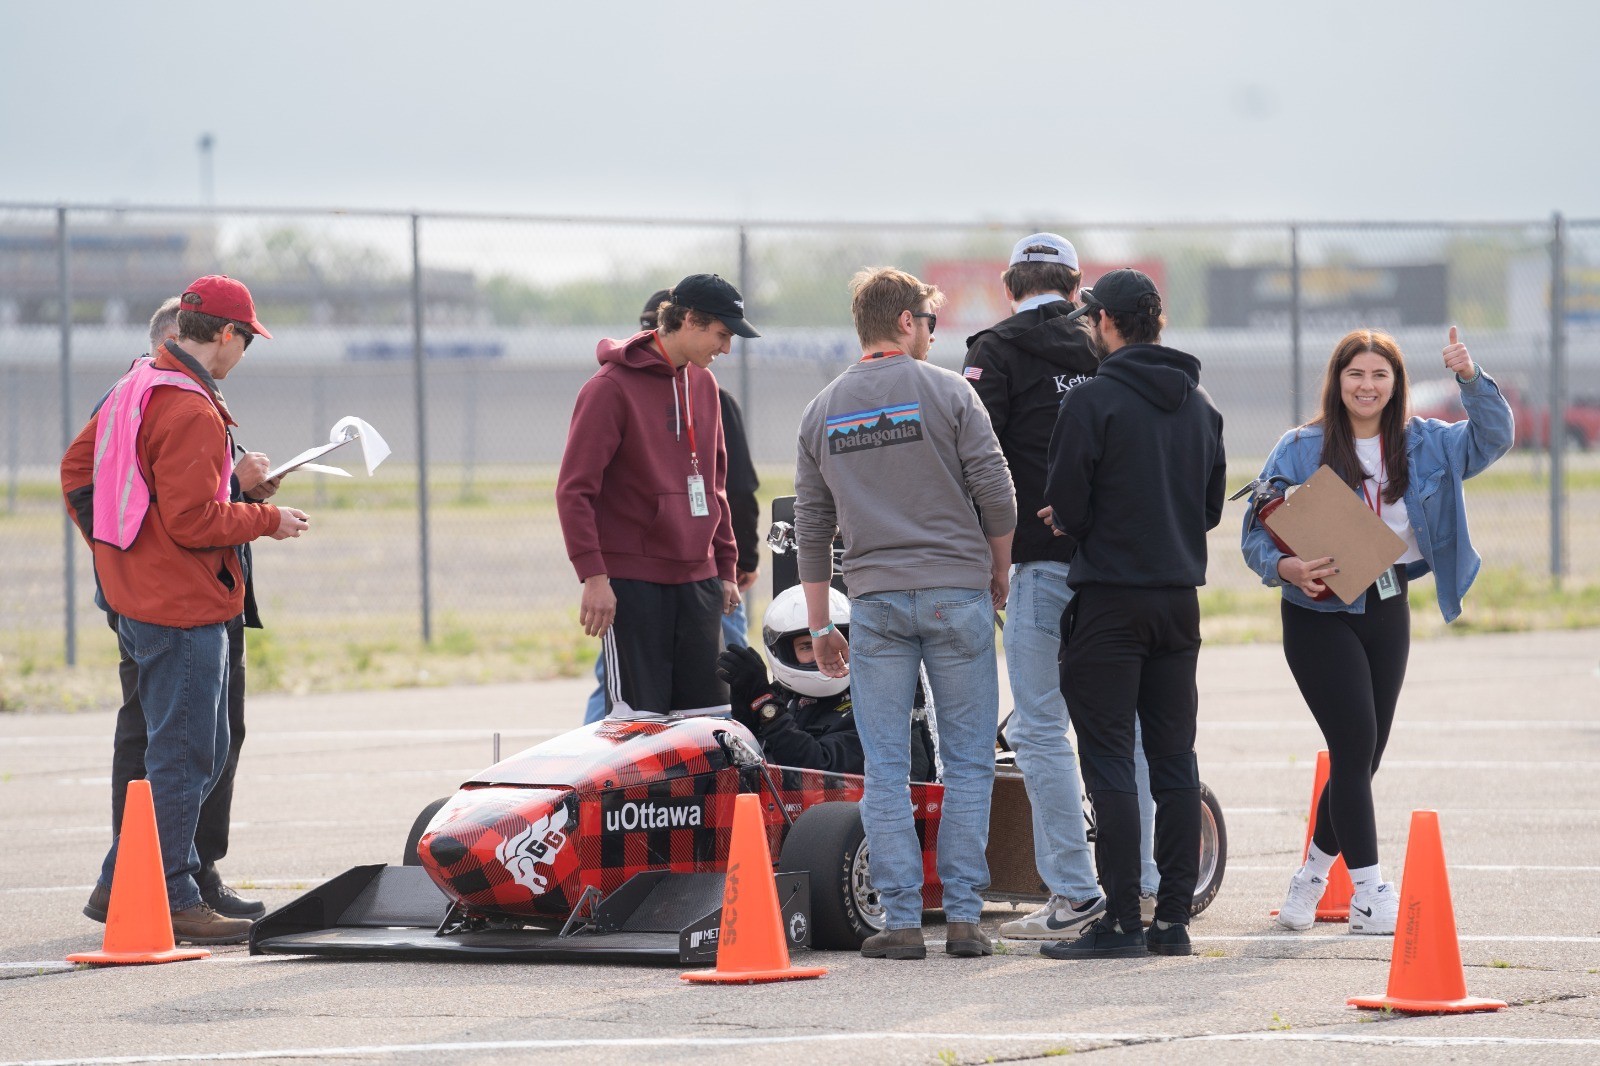 Victoria Hough, right, gives the thumbs up signal and smiles as the uOttawa Formula SAE team inspects its car on the tarmack.